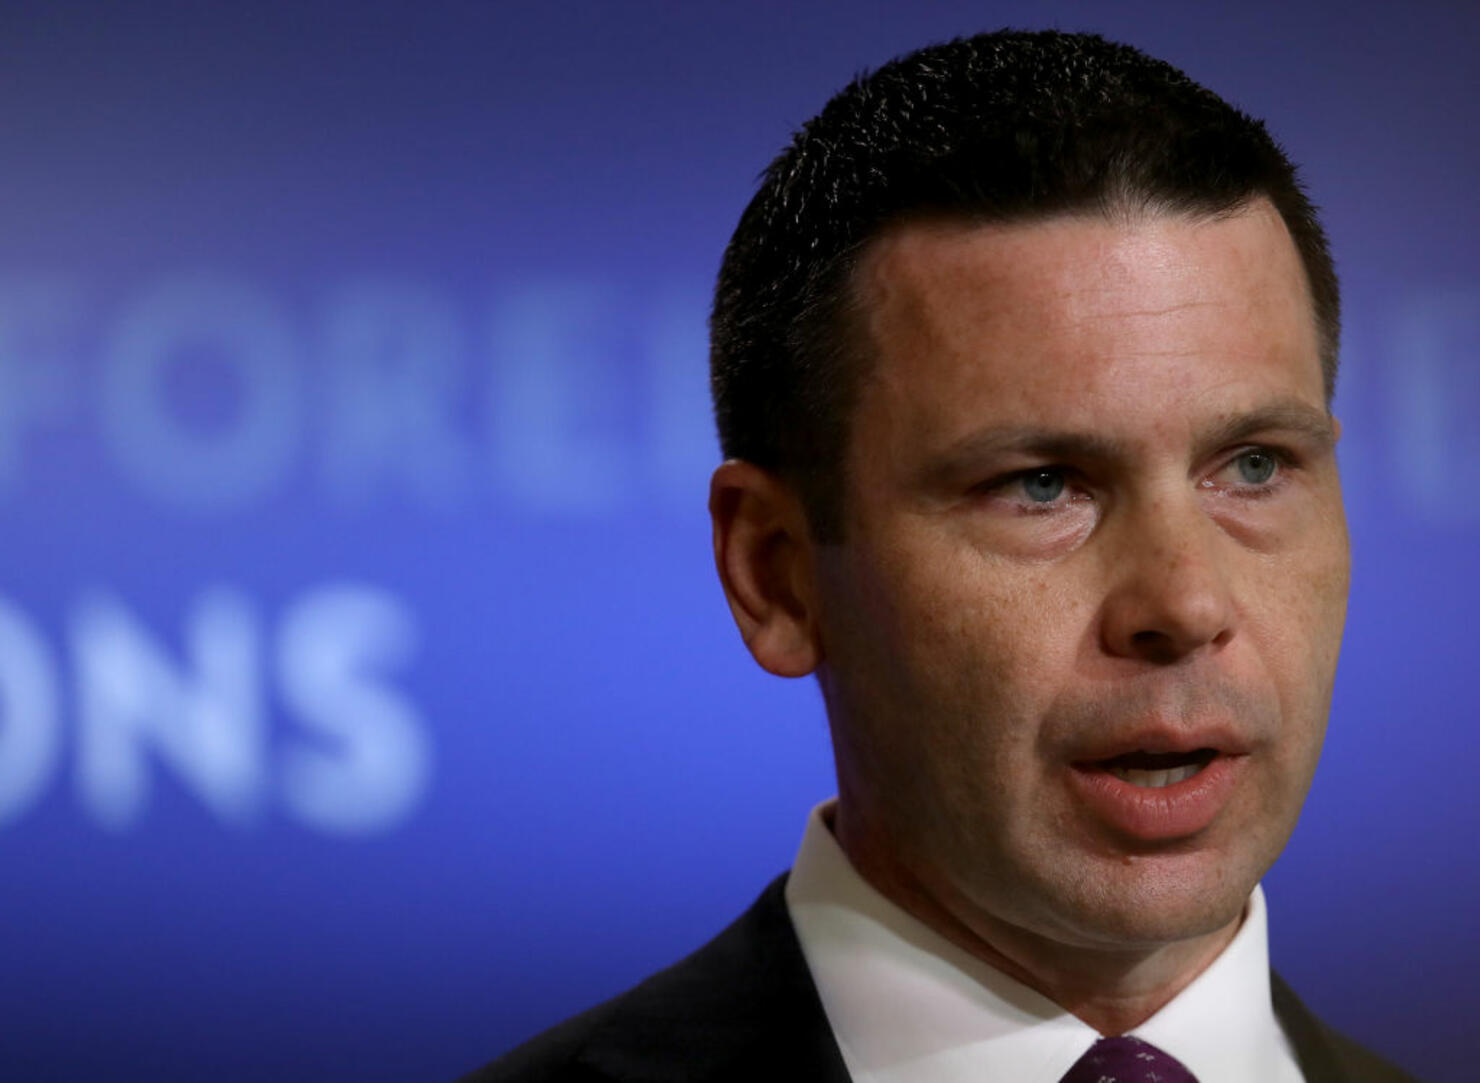 Acting Homeland Security Secretary Kevin McAleenan Joins Discussion At The Council On Foreign Relations